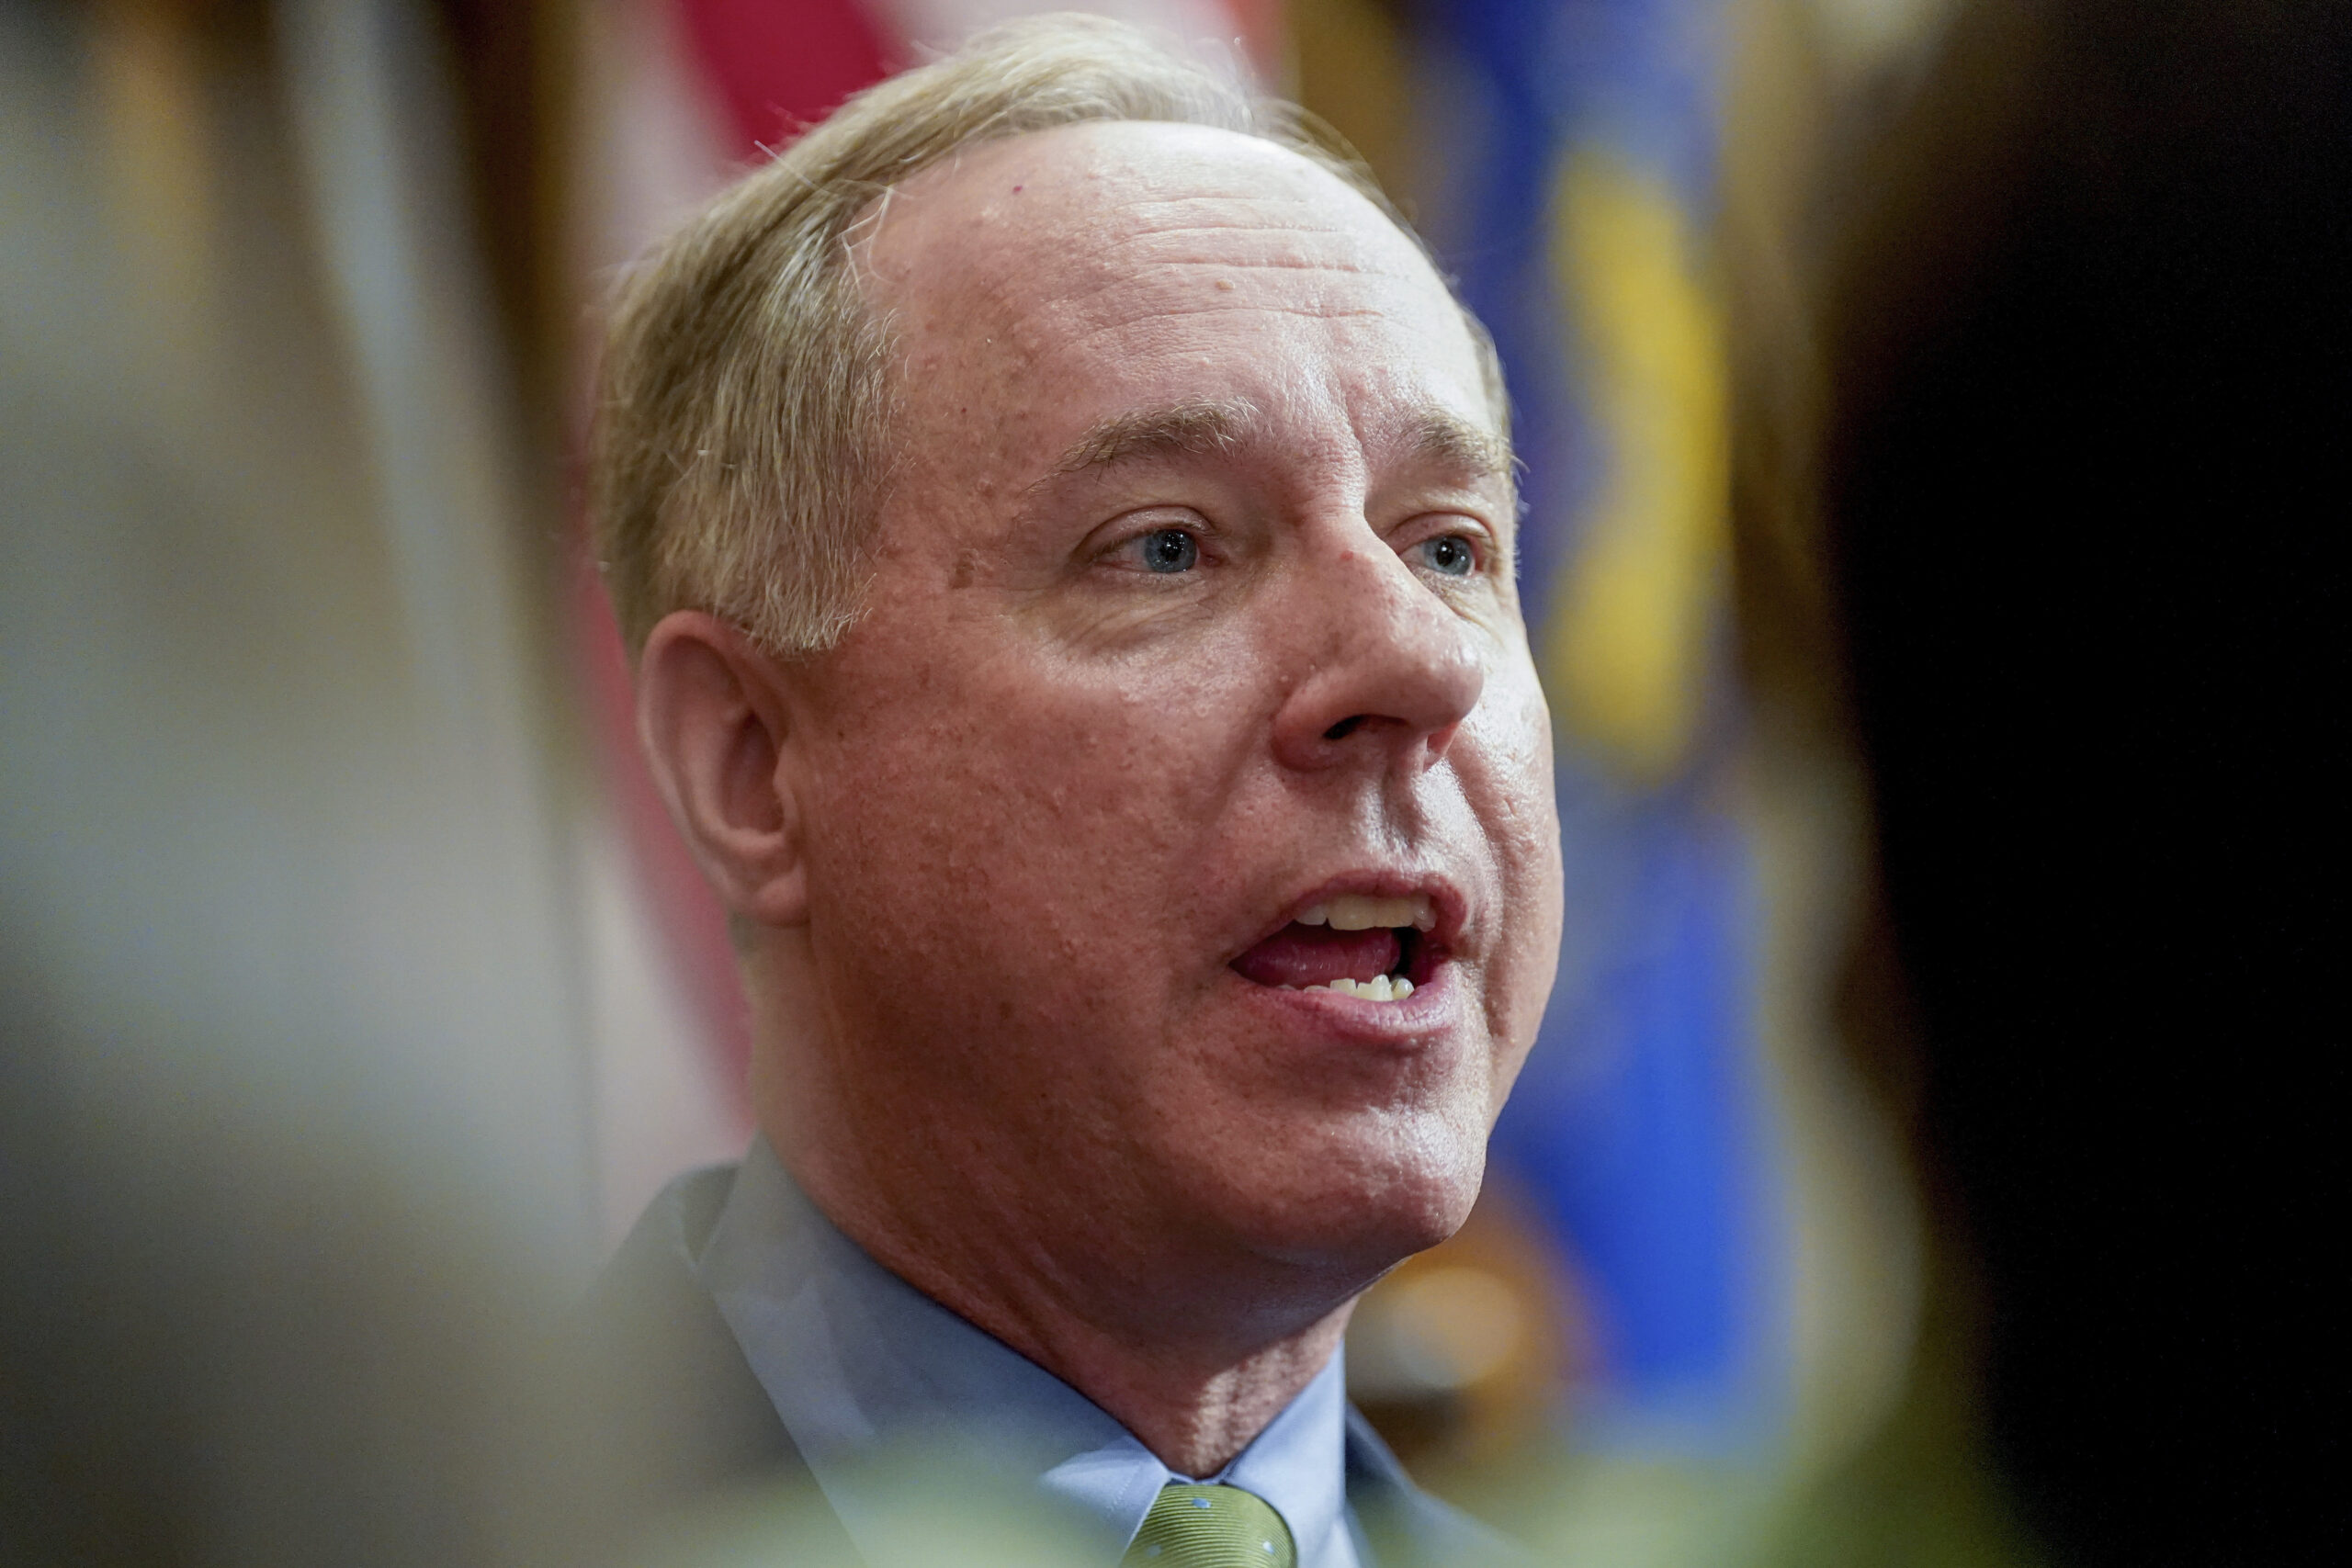 Assembly Speaker Robin Vos doubles down on requiring sales tax referendum for Milwaukee